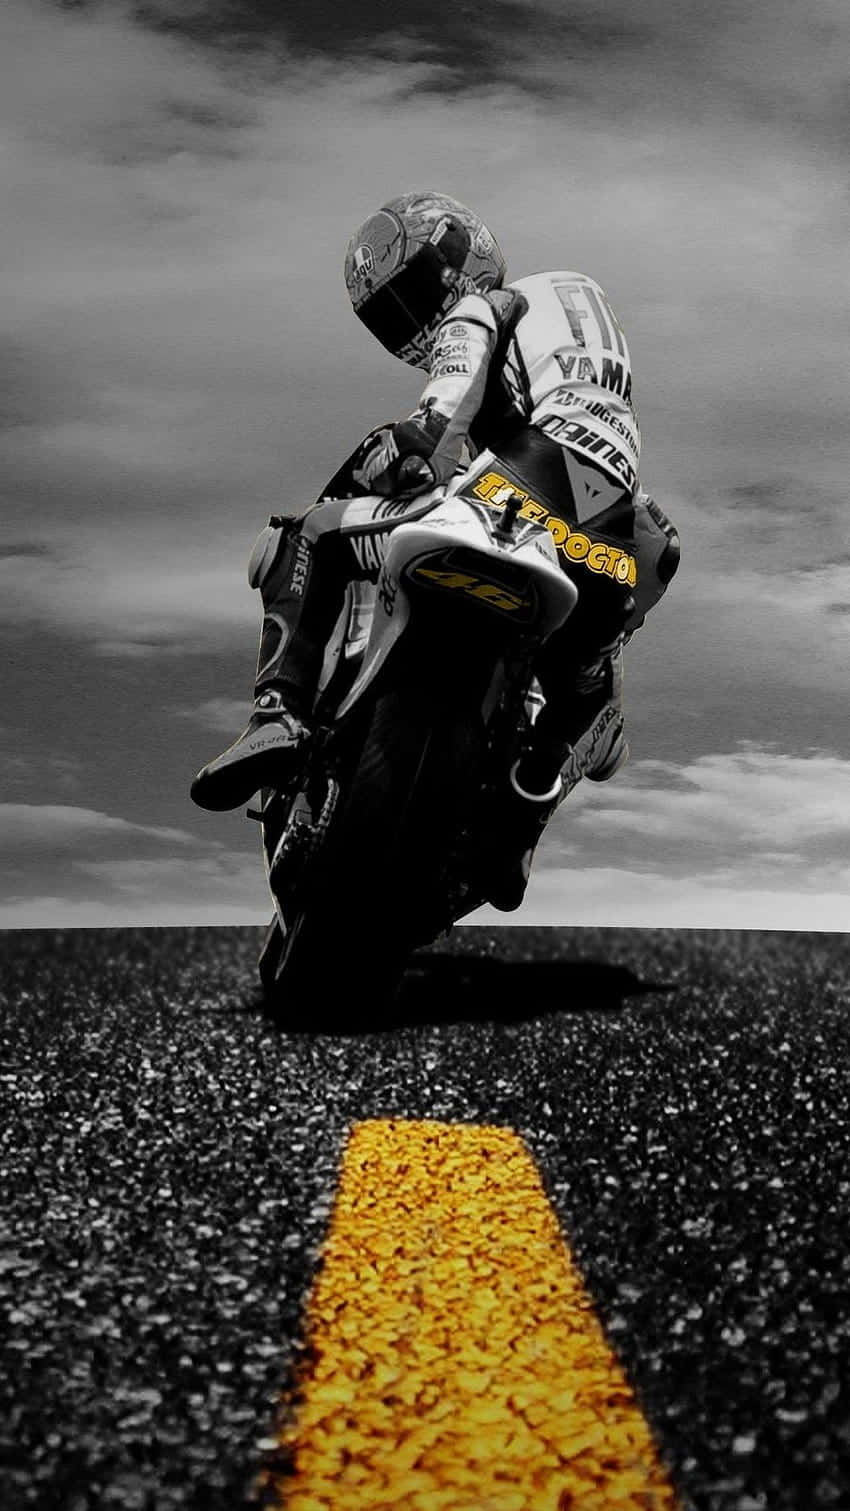 Ride in Style - Put Your Iphone and Your Motorcycle together Wallpaper